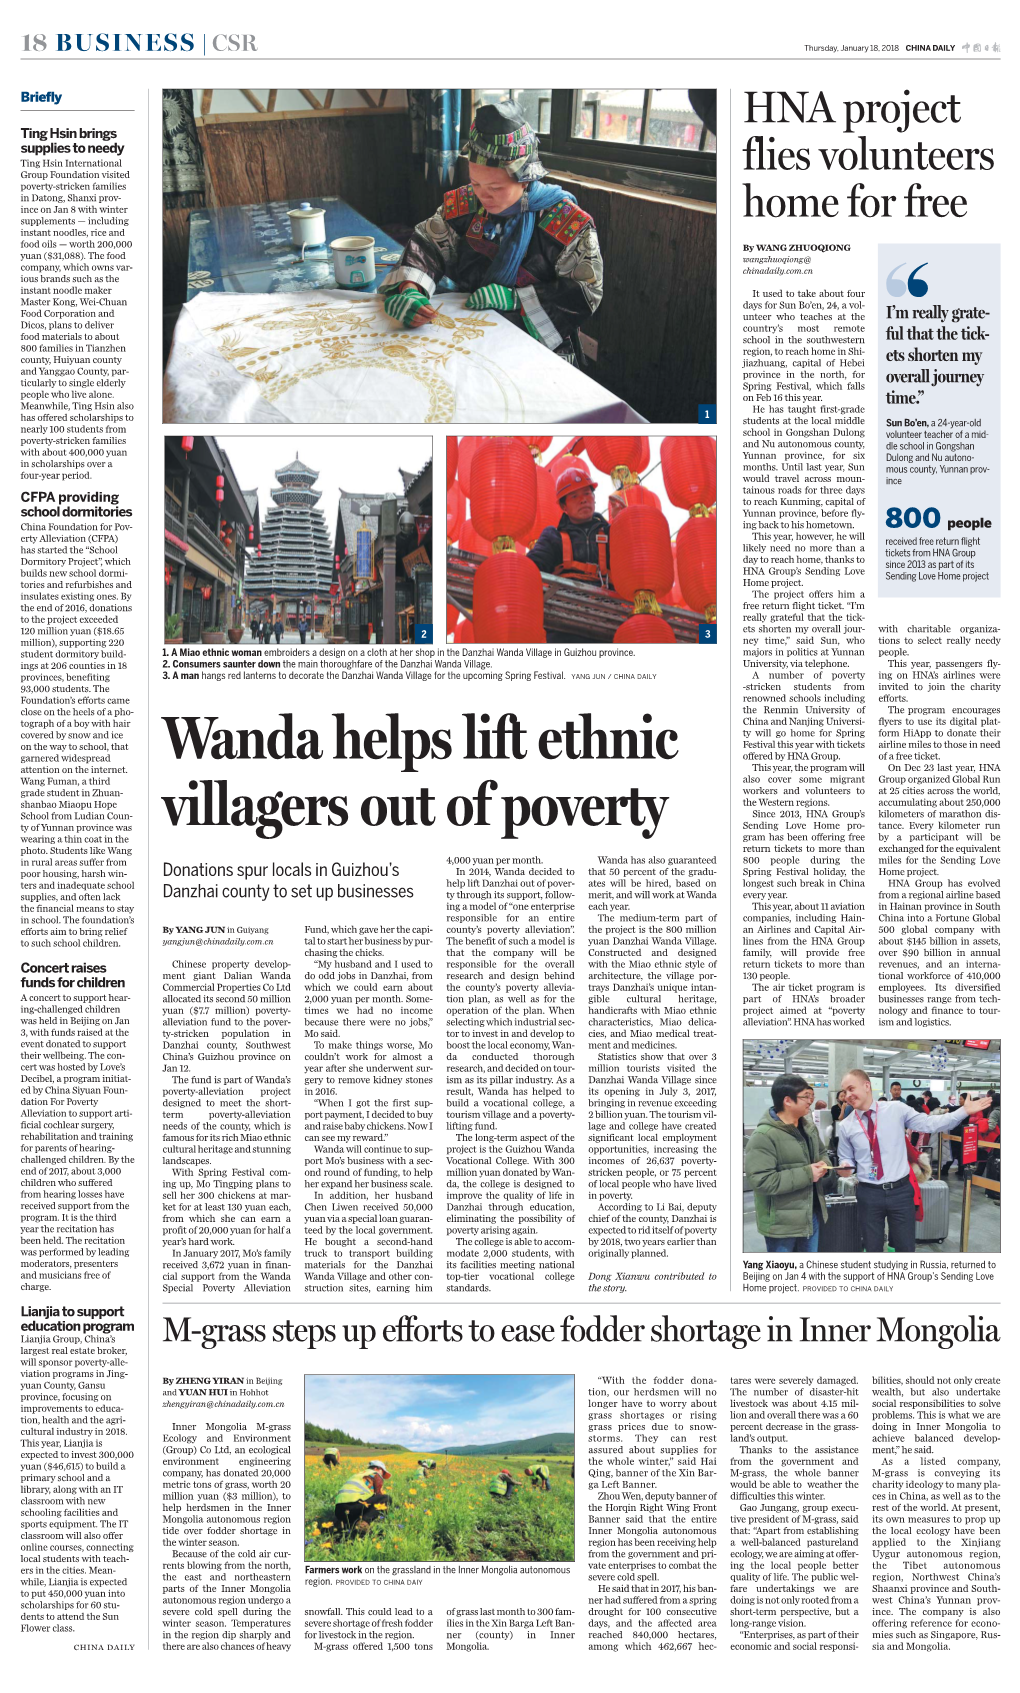 Wanda Helps Lift Ethnic Villagers out of Poverty